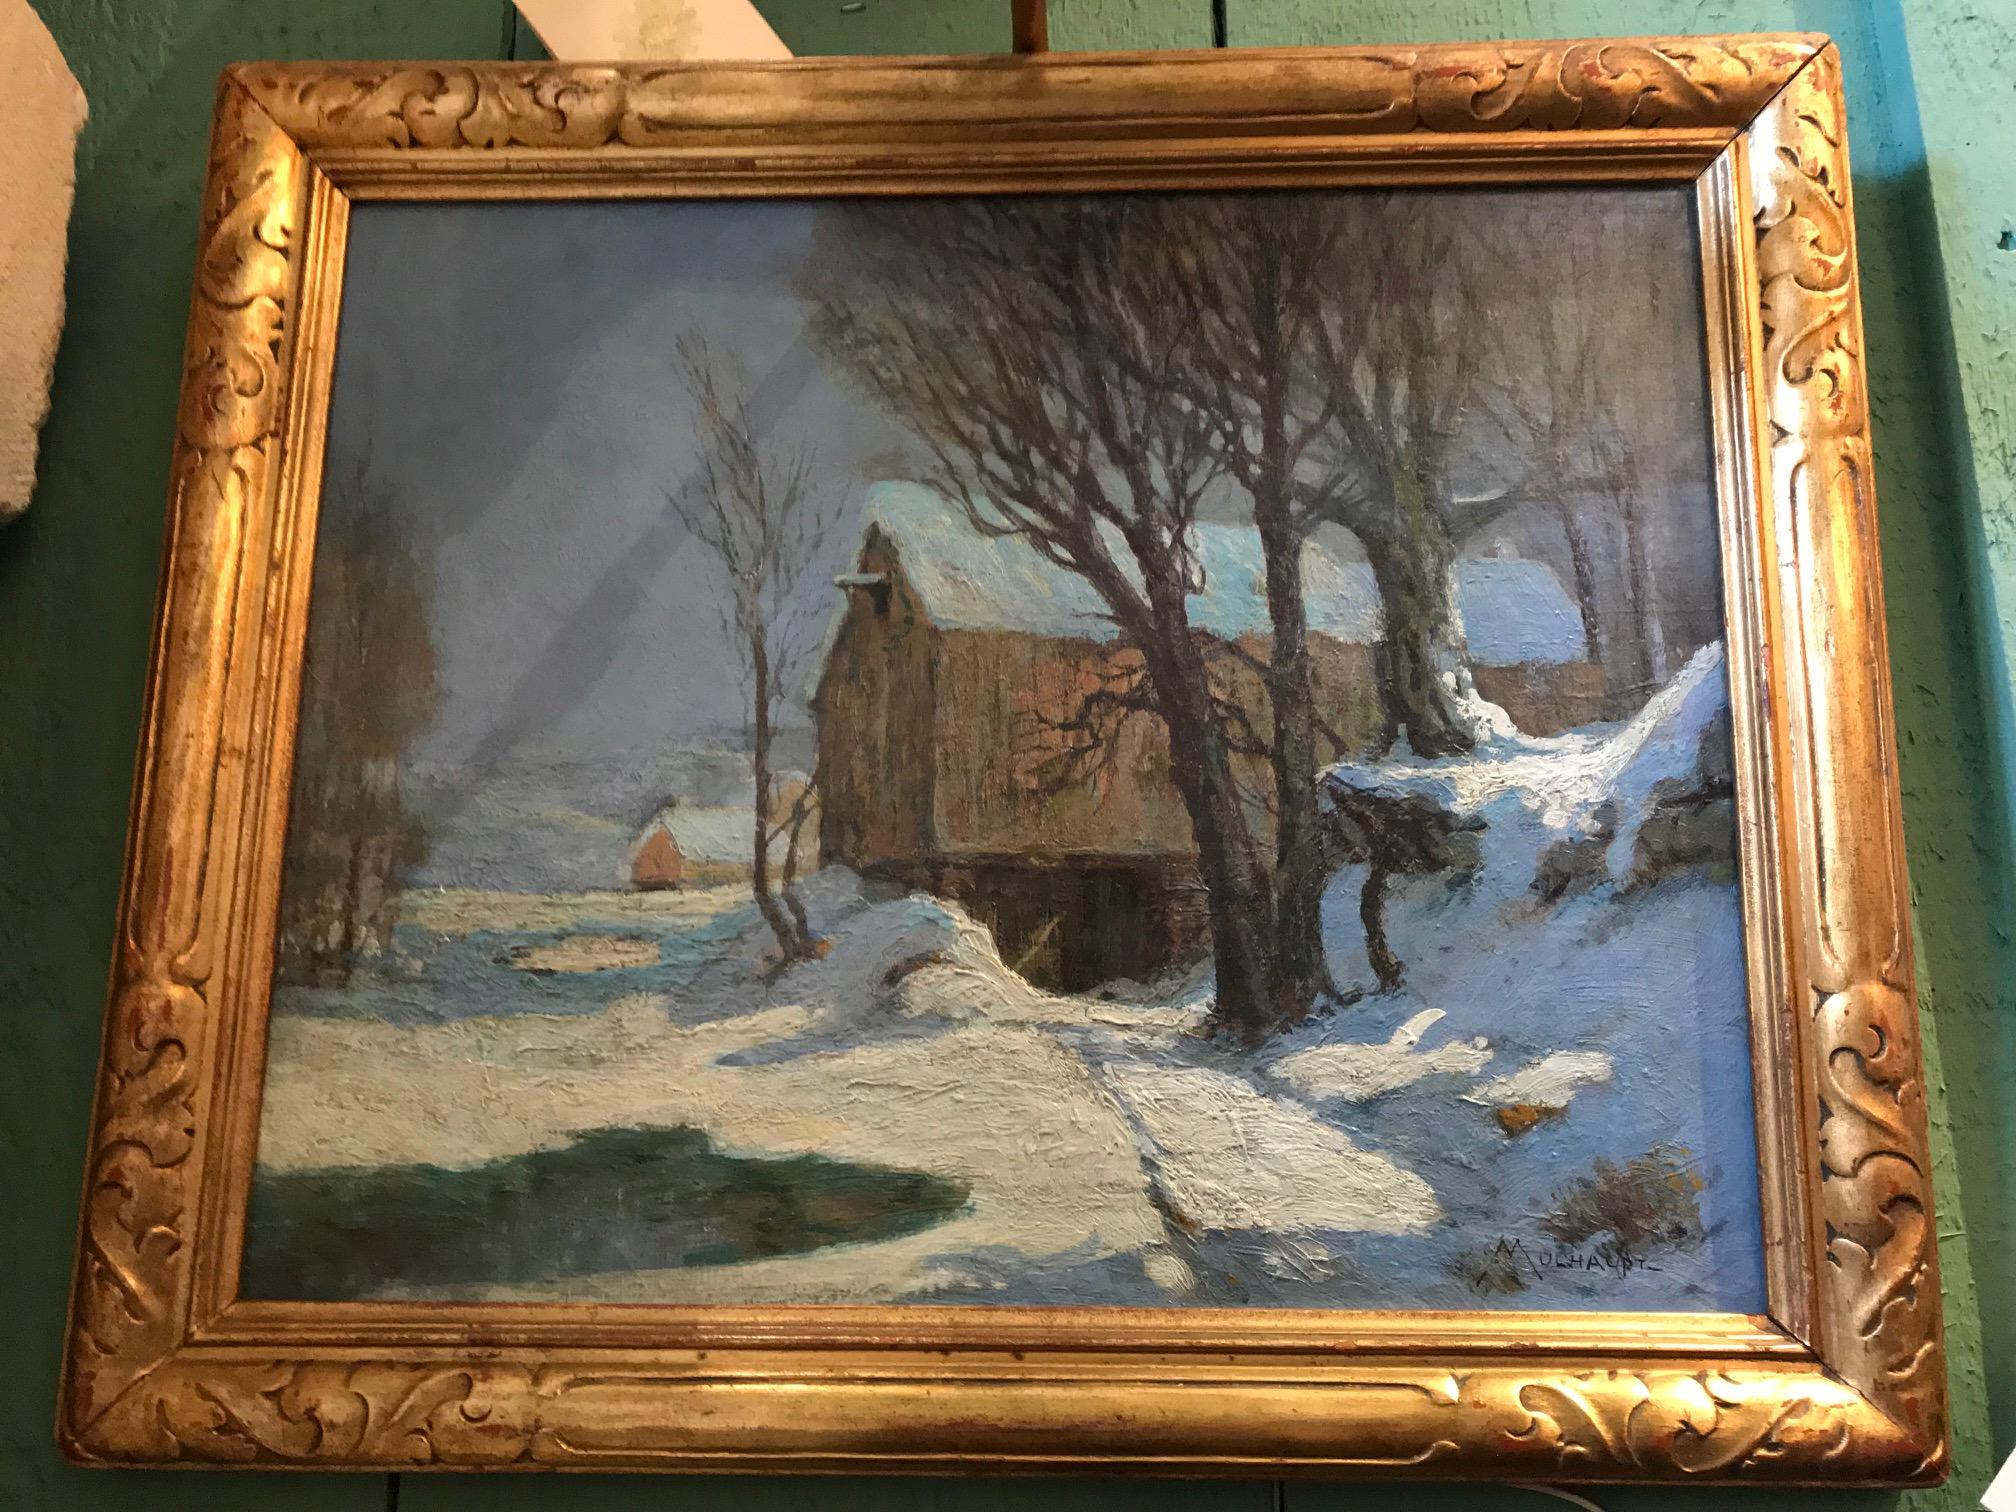 “Barn in Moonlight” By Frederick John Mulhaupt (1871 – 1938) American. Signed / Oil on canvas laid on board.
Similar Artwork Sold for $28000.00 and $32,500 at Auction “Winter Calm” snow
Known as 